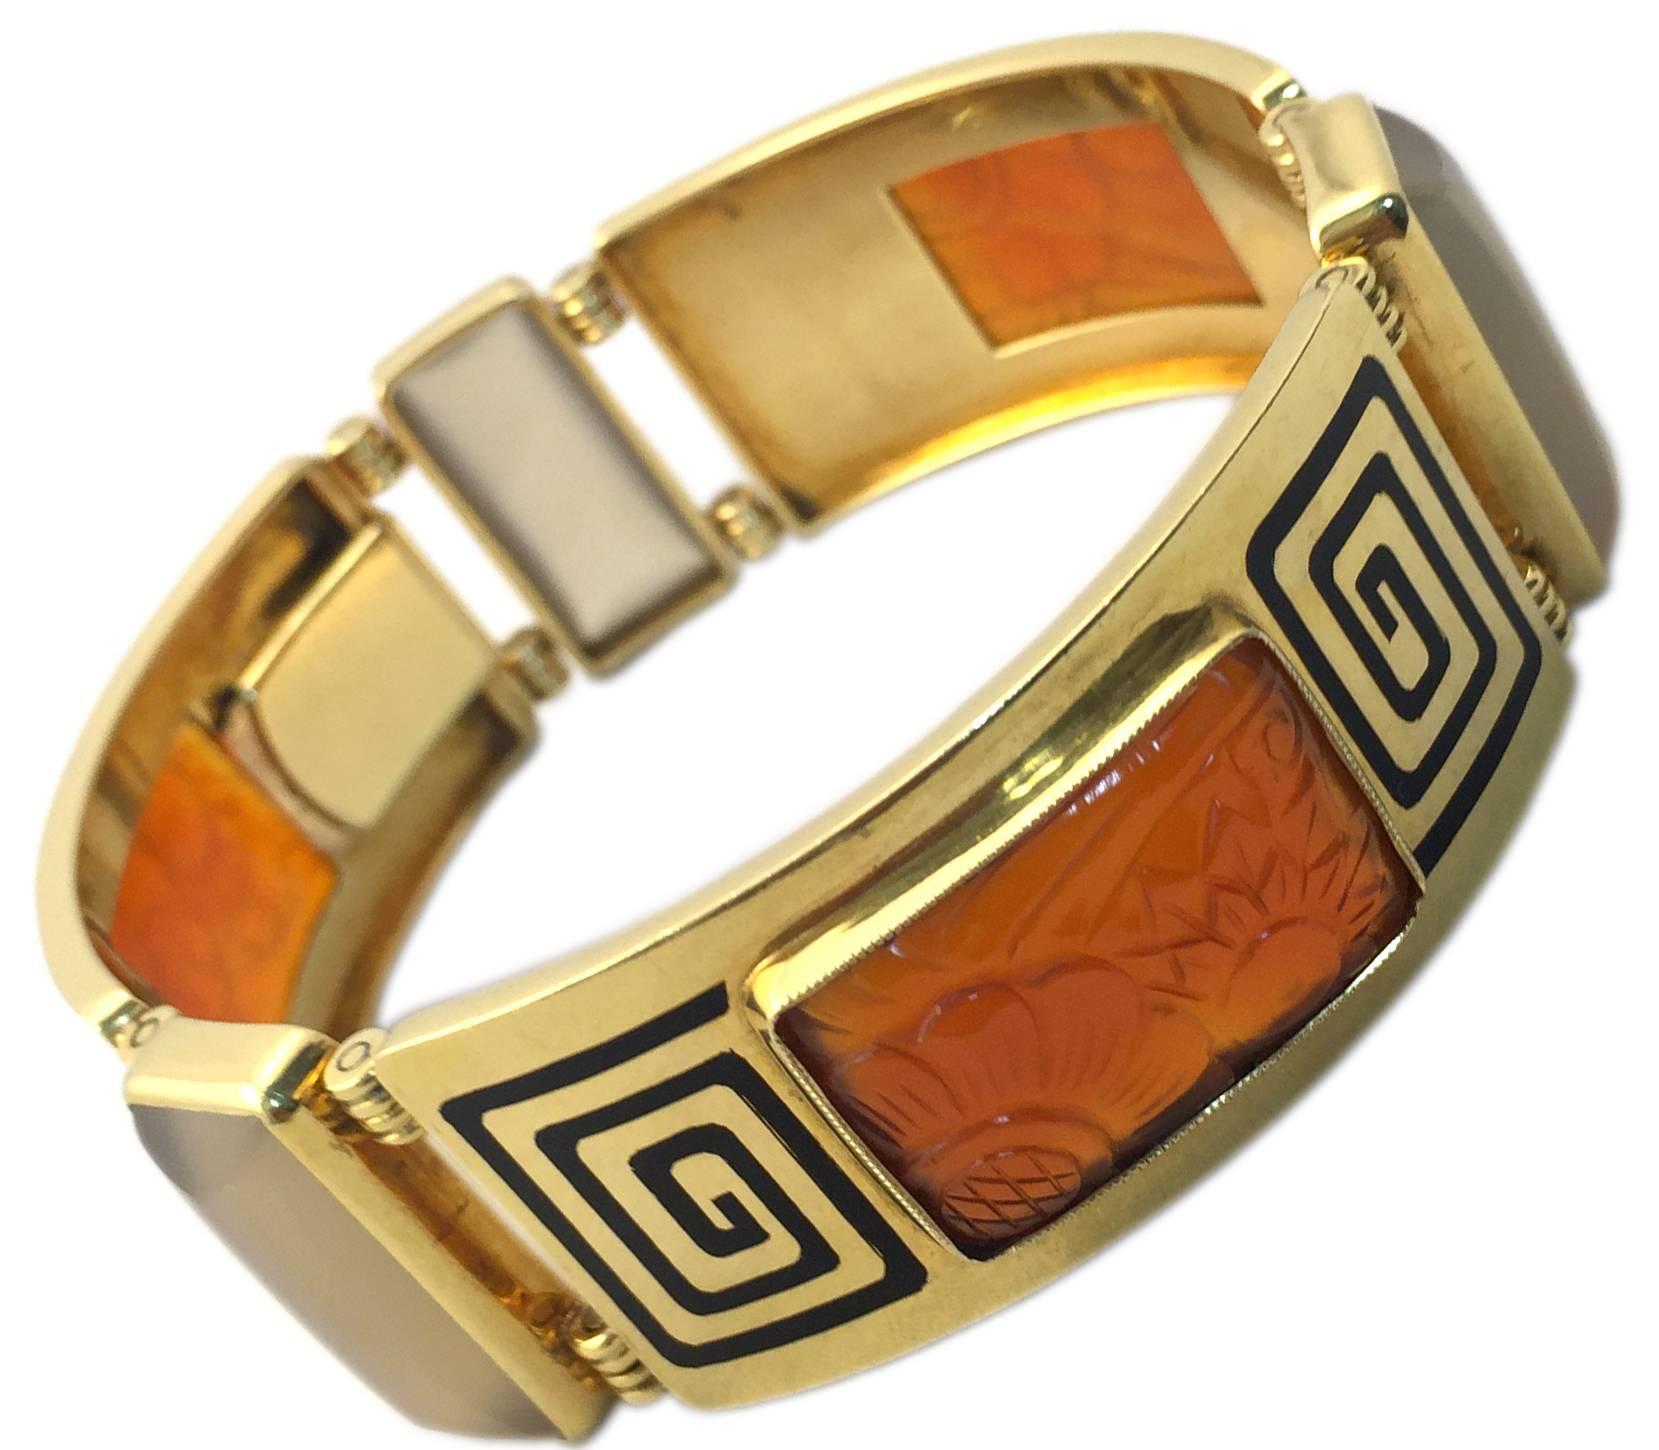 A superb Art Deco bracelet presenting an unusual combination of carved carnelian, agate, and black enamel geometric patterns on 18kt yellow gold. Made in France, circa 1925.